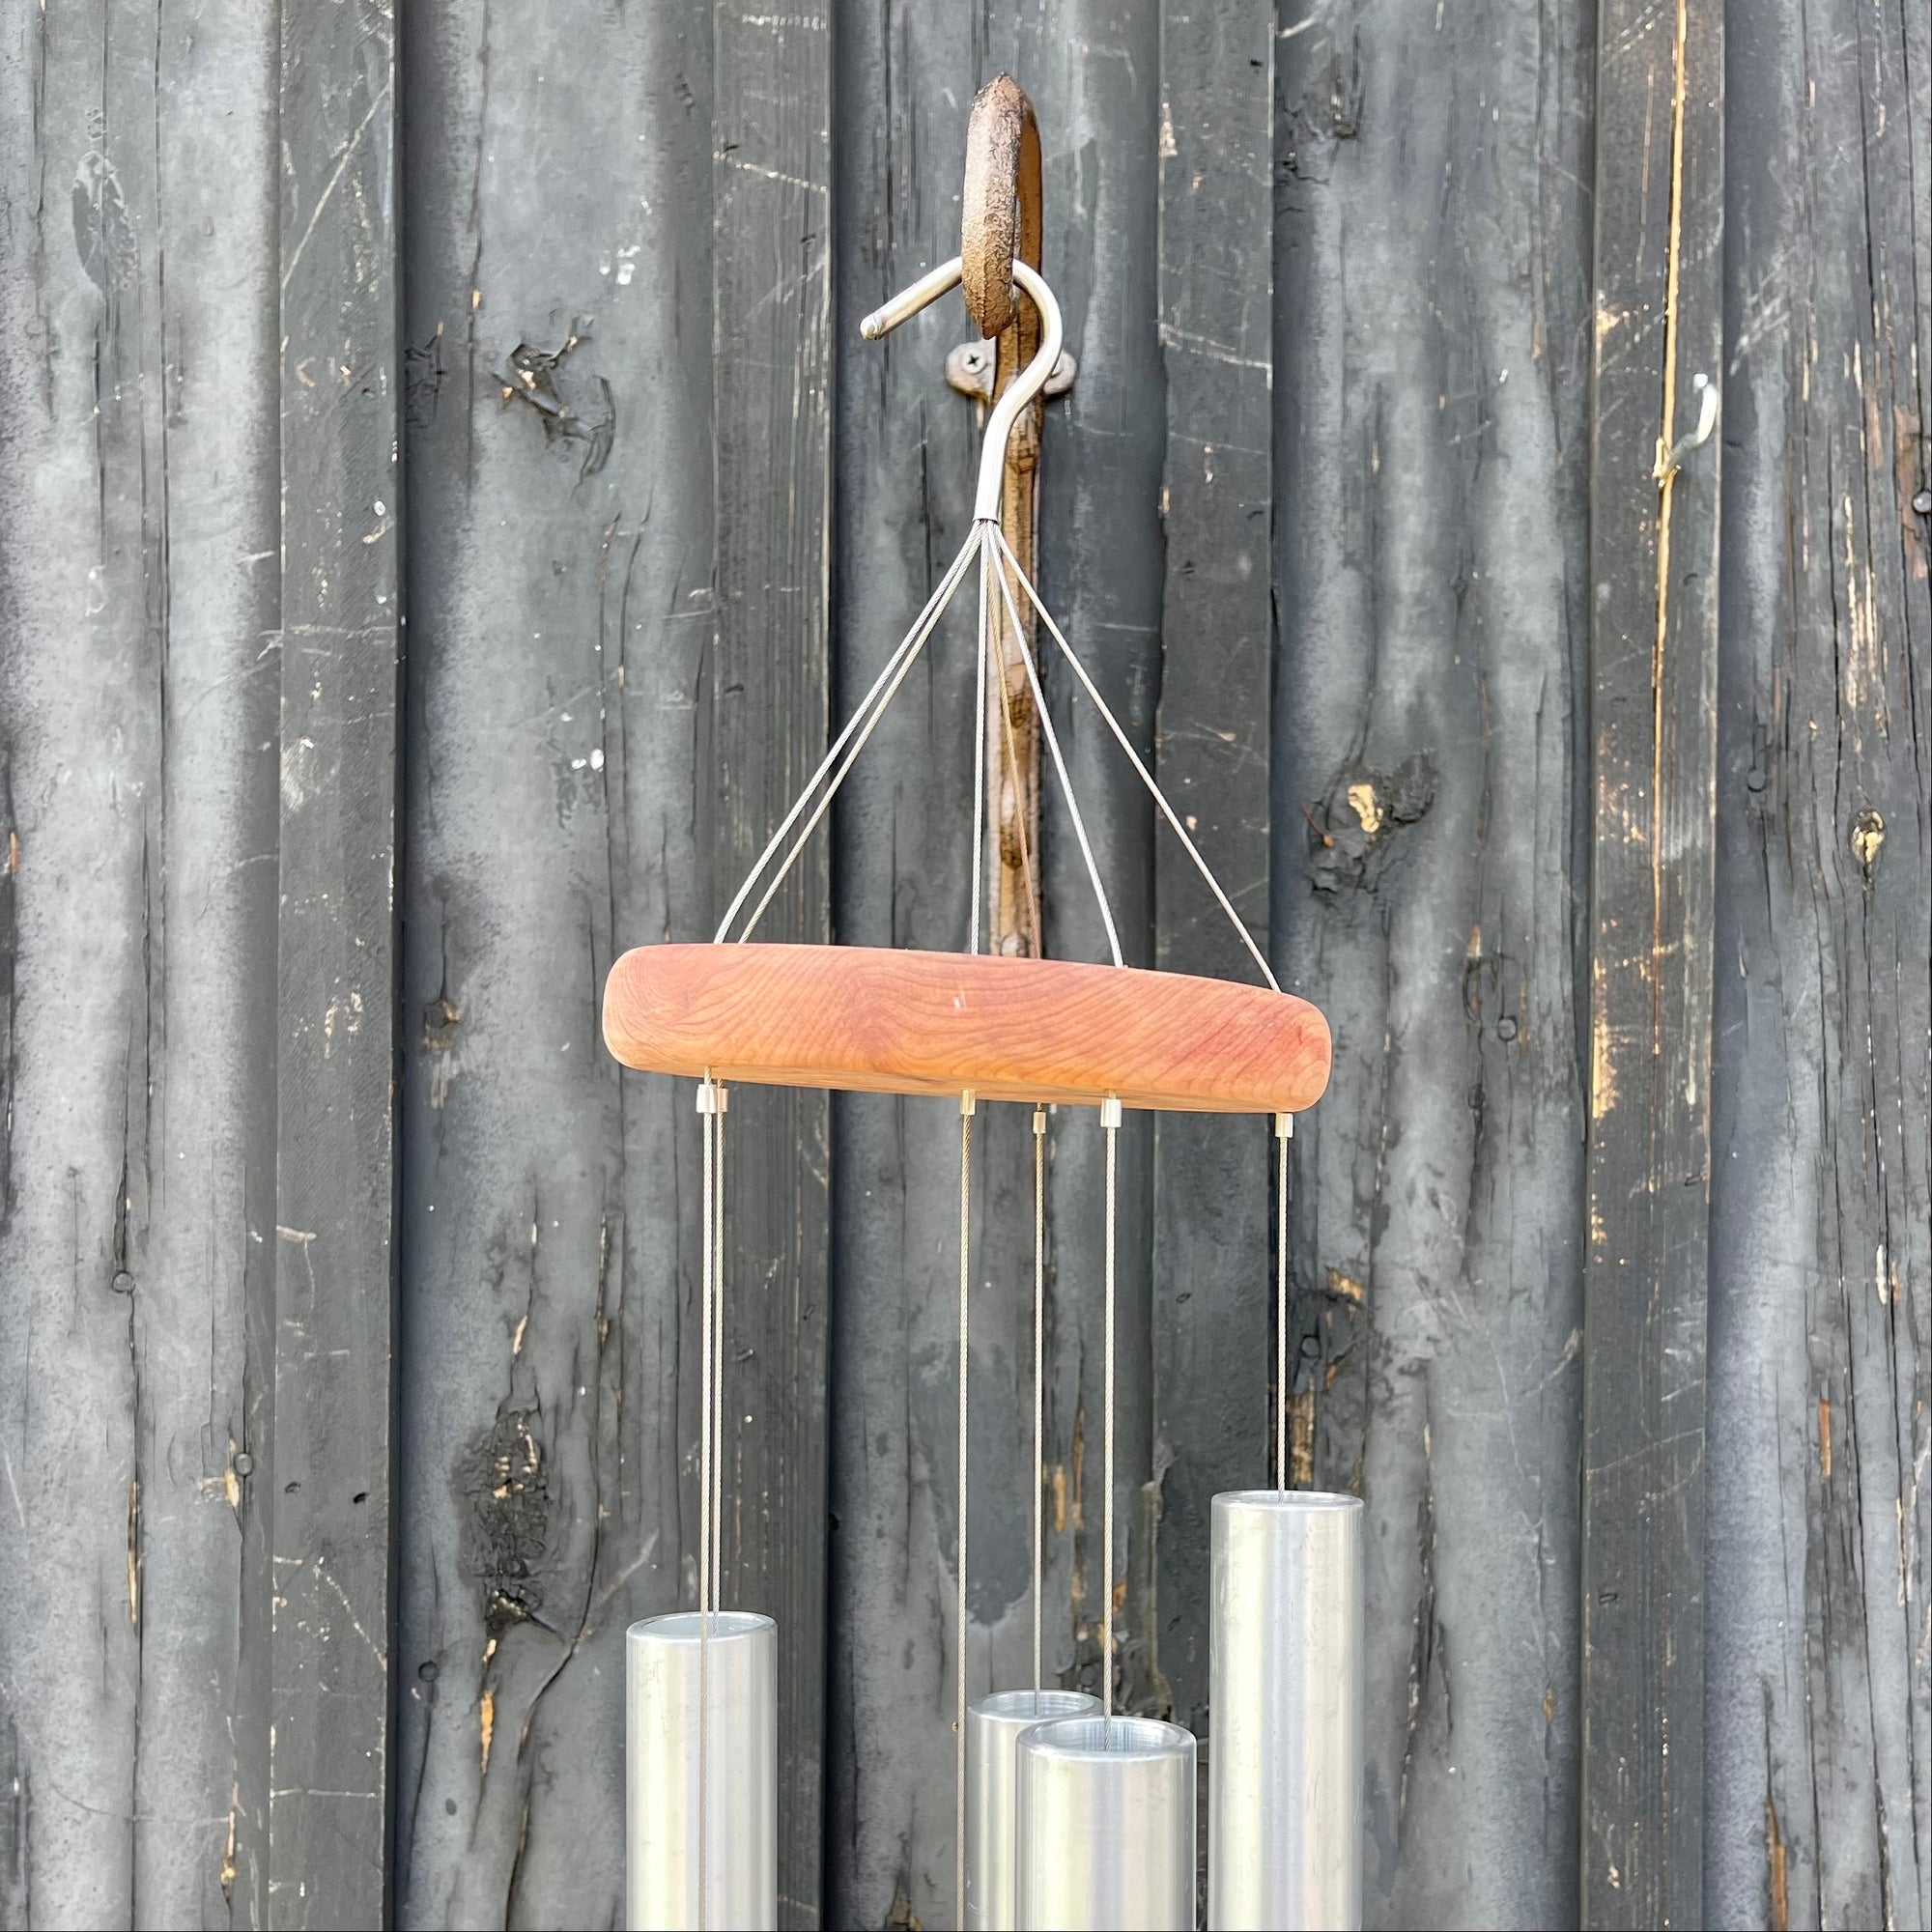 The No More Night Wind Chime